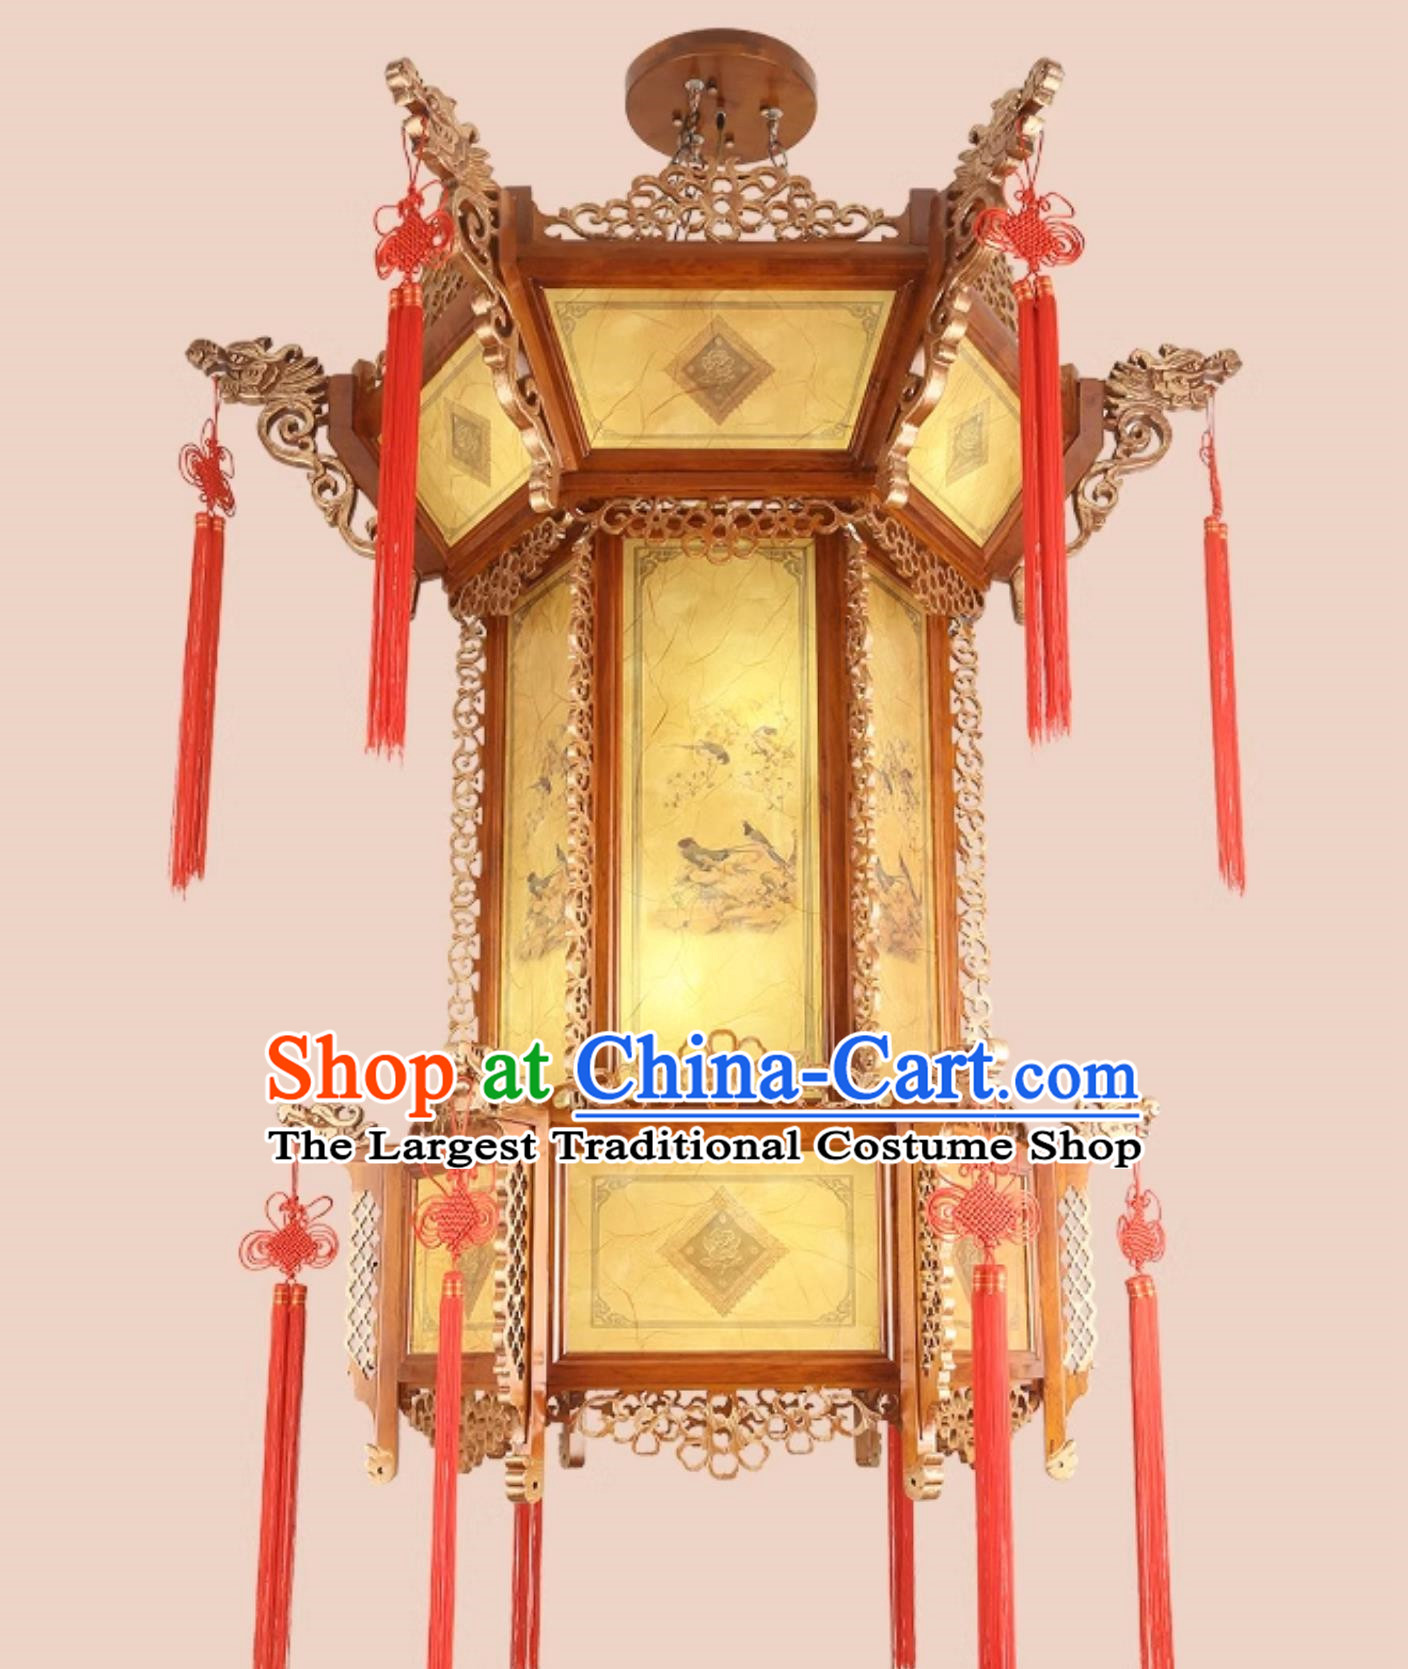 57 Inches Diameter Chinese Antique Lantern Villa Living Room Large Chandelier Classical Solid Wood Hexagonal Faucet Palace Lantern Hotel Chandelier